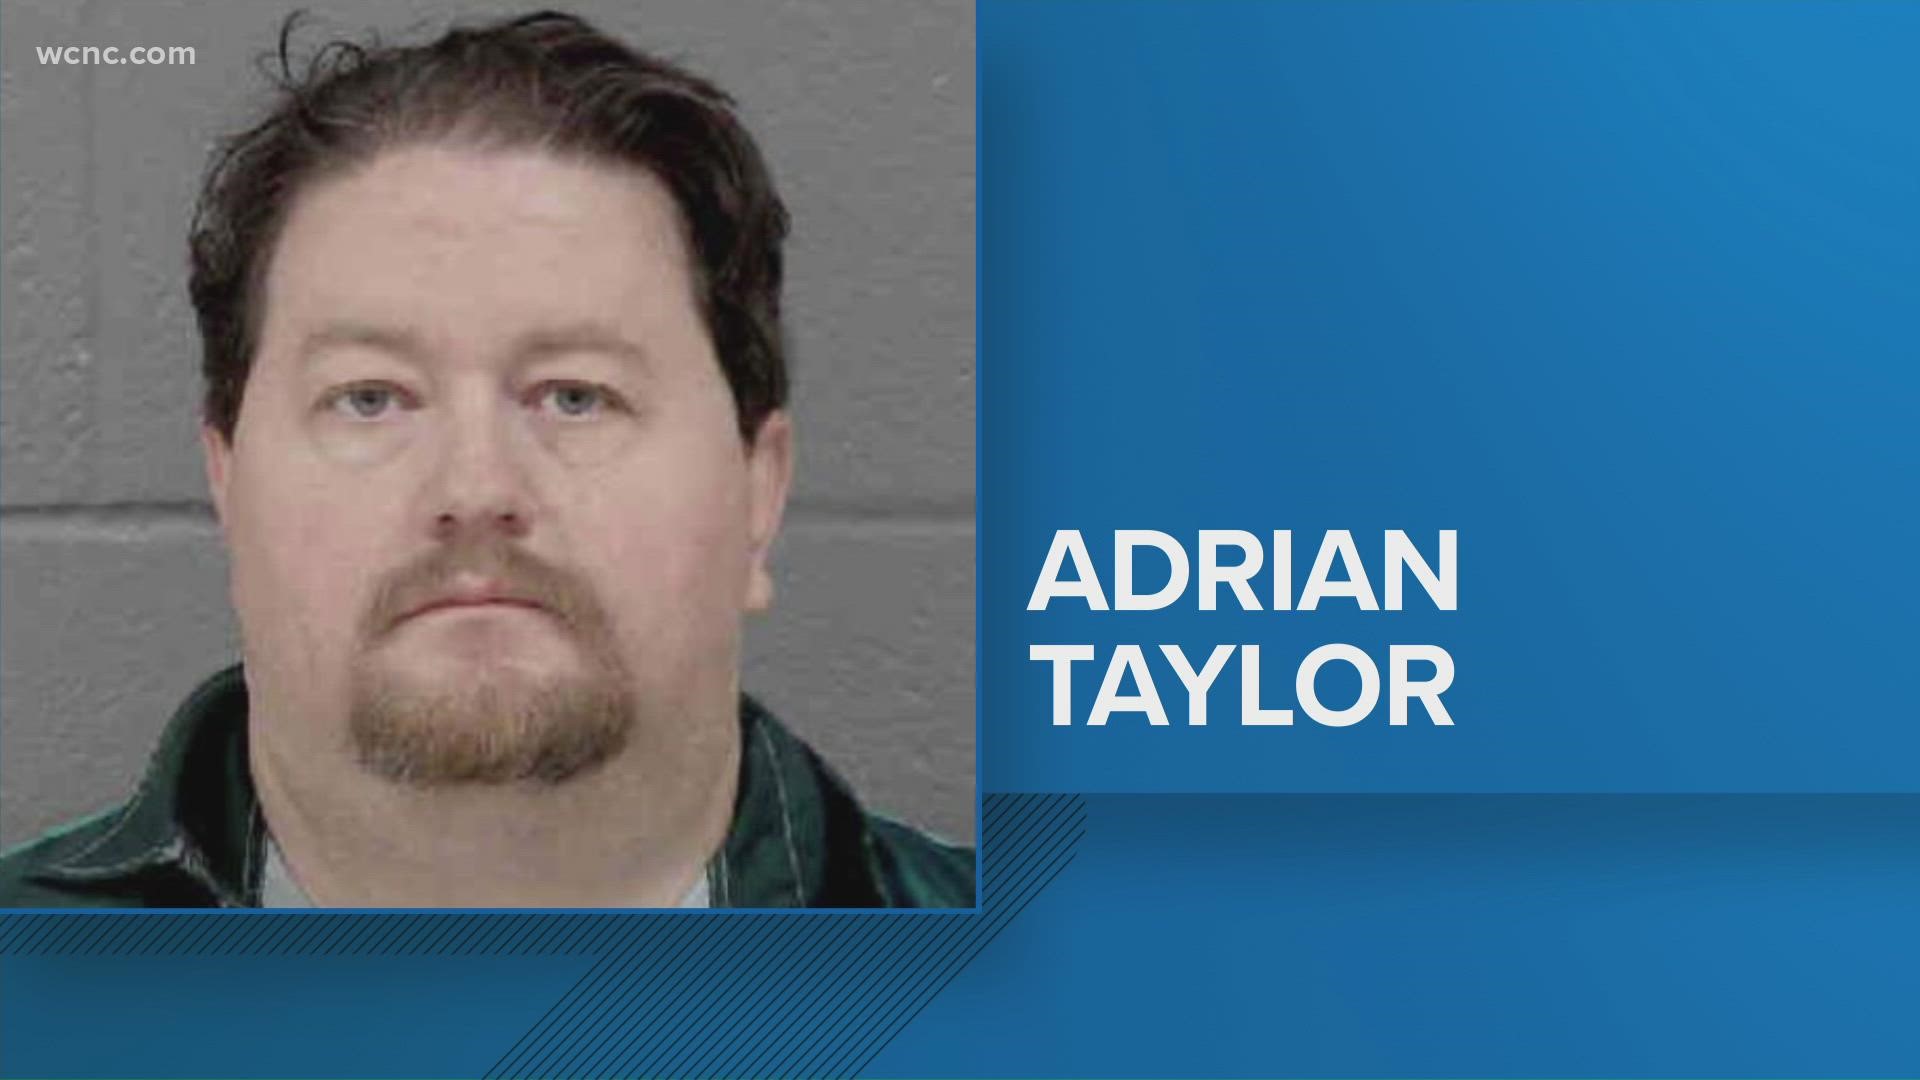 He is charged with three counts of second-degree sexual exploitation of a minor. CMS said Adrian Taylor is suspended from the school with pay.